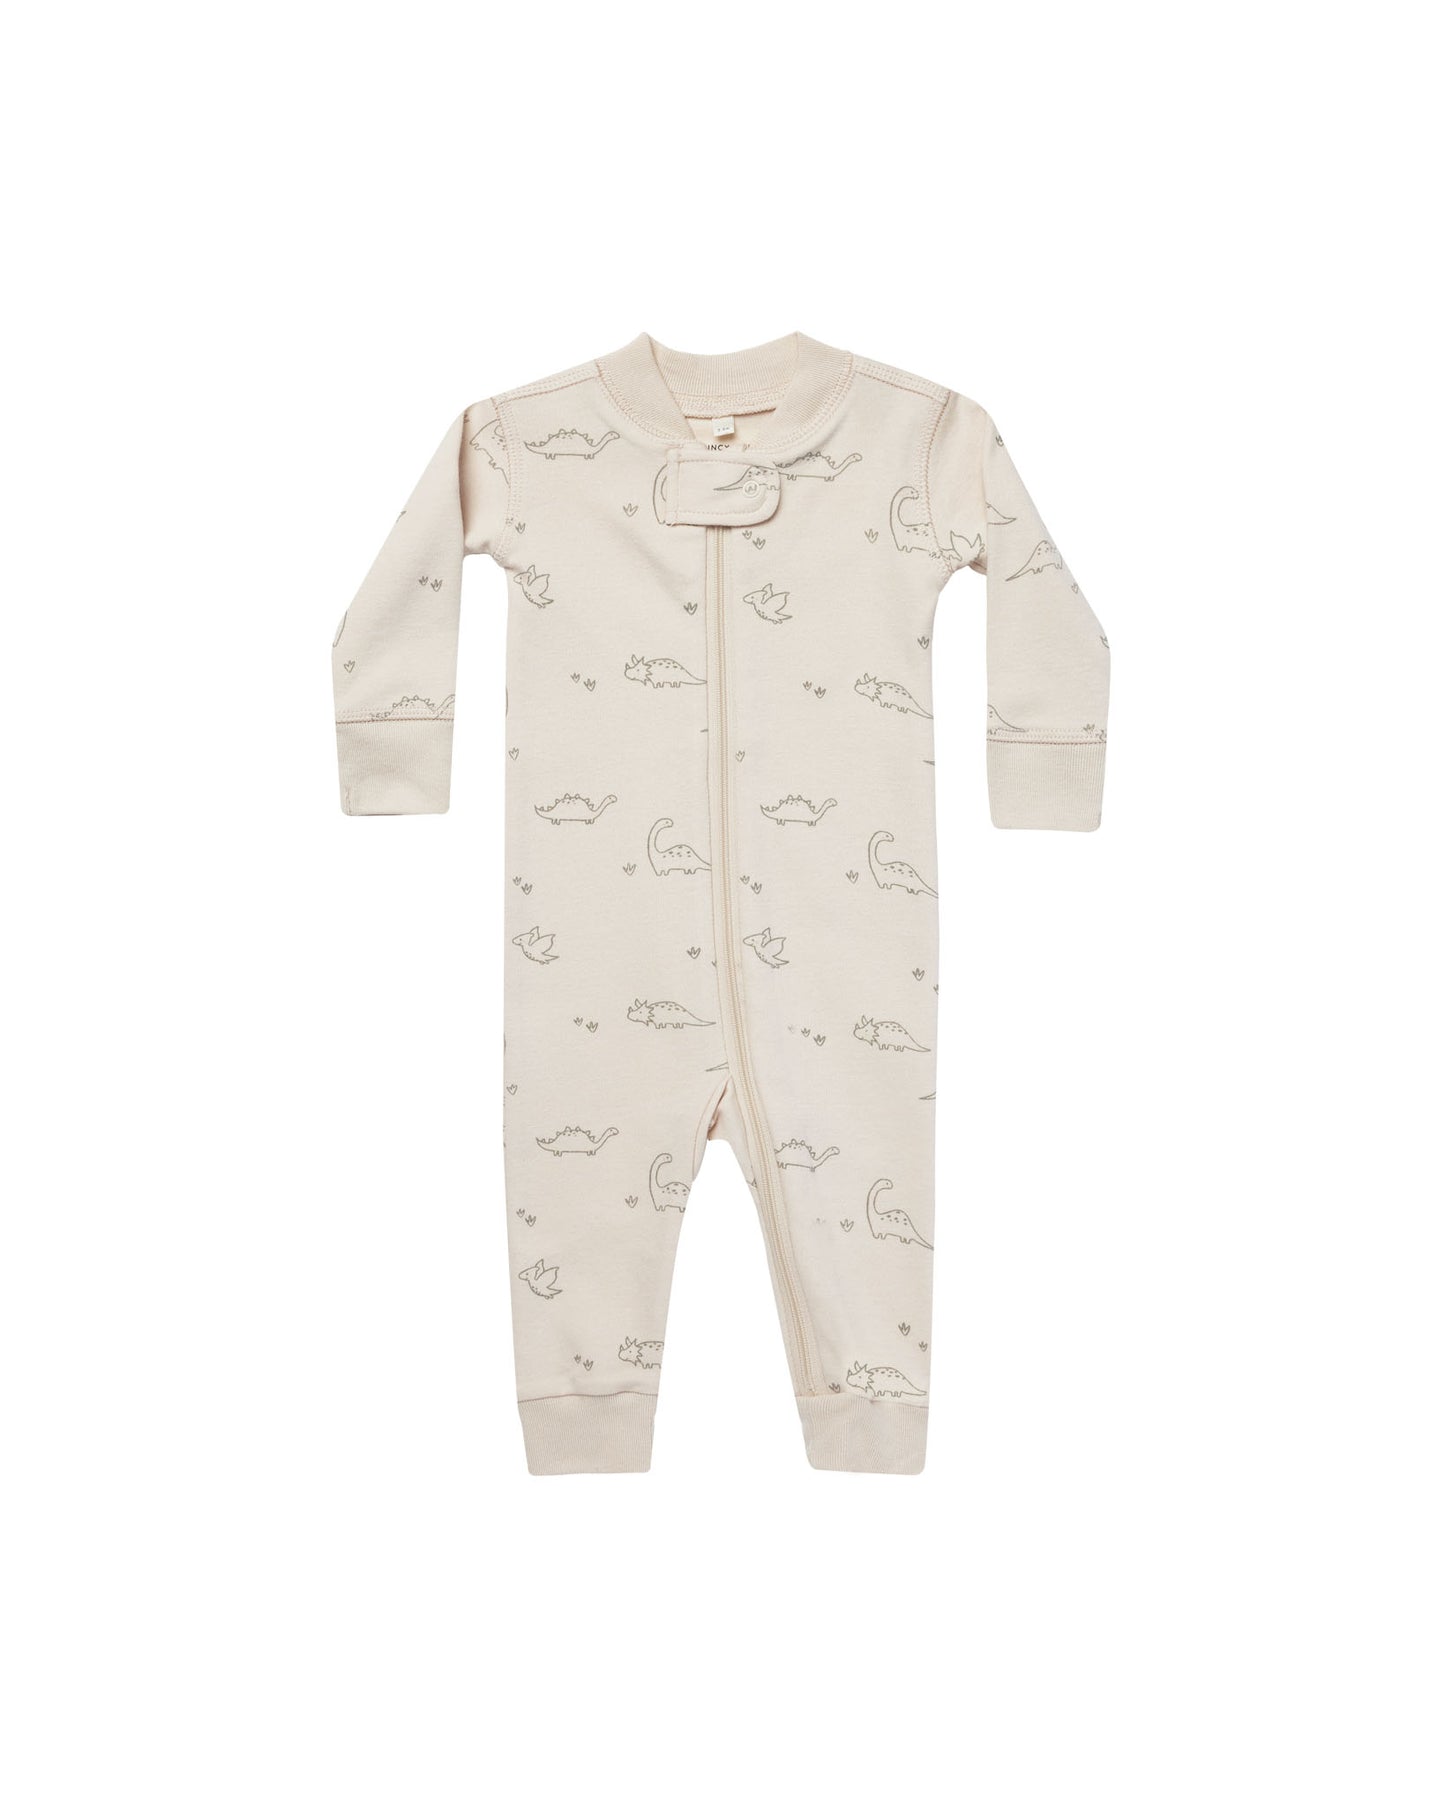 Quincy Mae Jumpsuits & Sleepers Fall 23